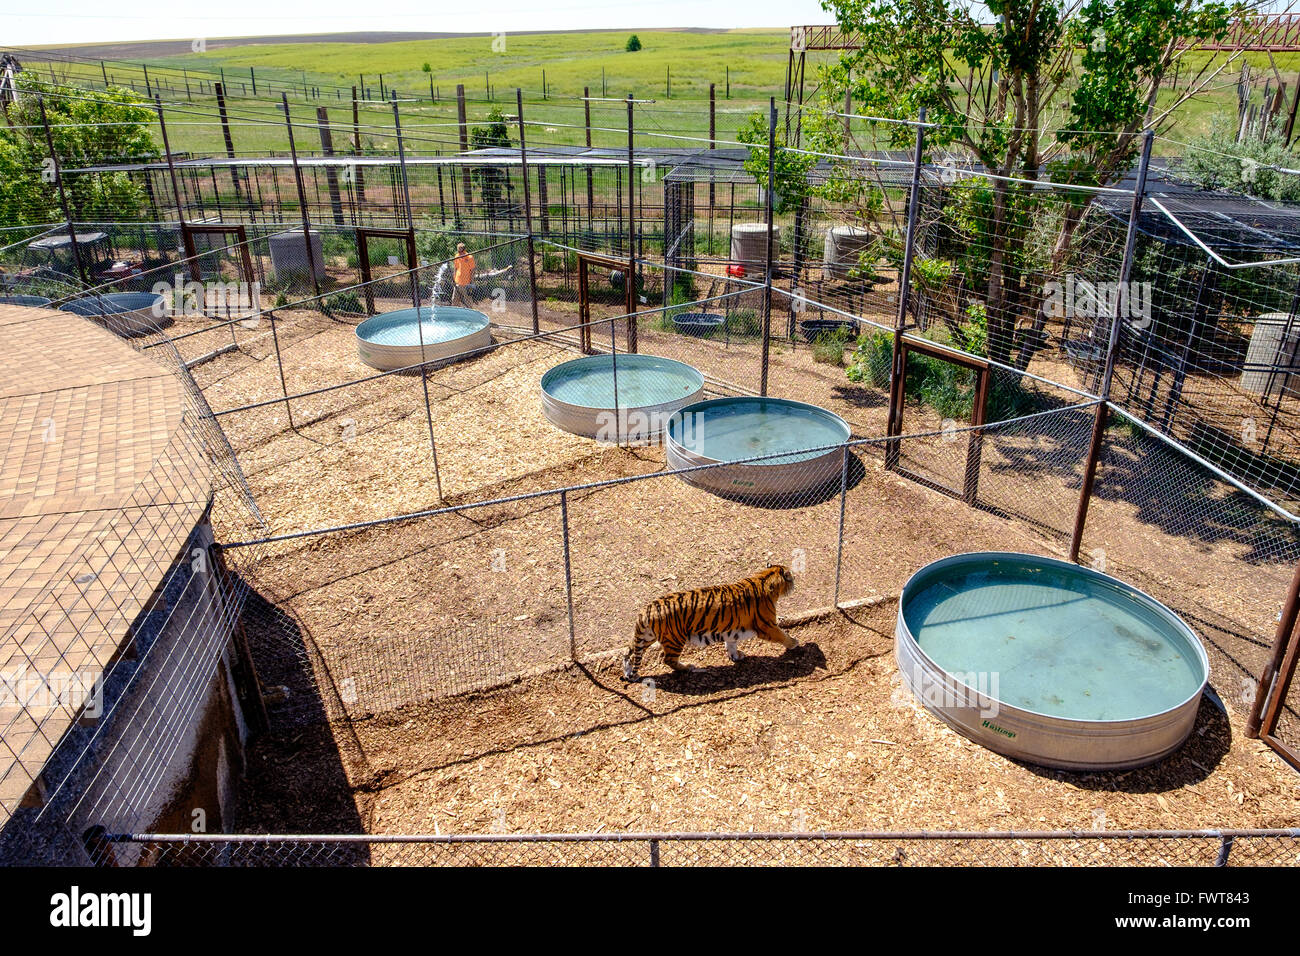 A tiger paces along a fence in a pen as a volunteer fills tanks with water at the Wild Animal Sanctuary in Keenesburg Colorado Stock Photo